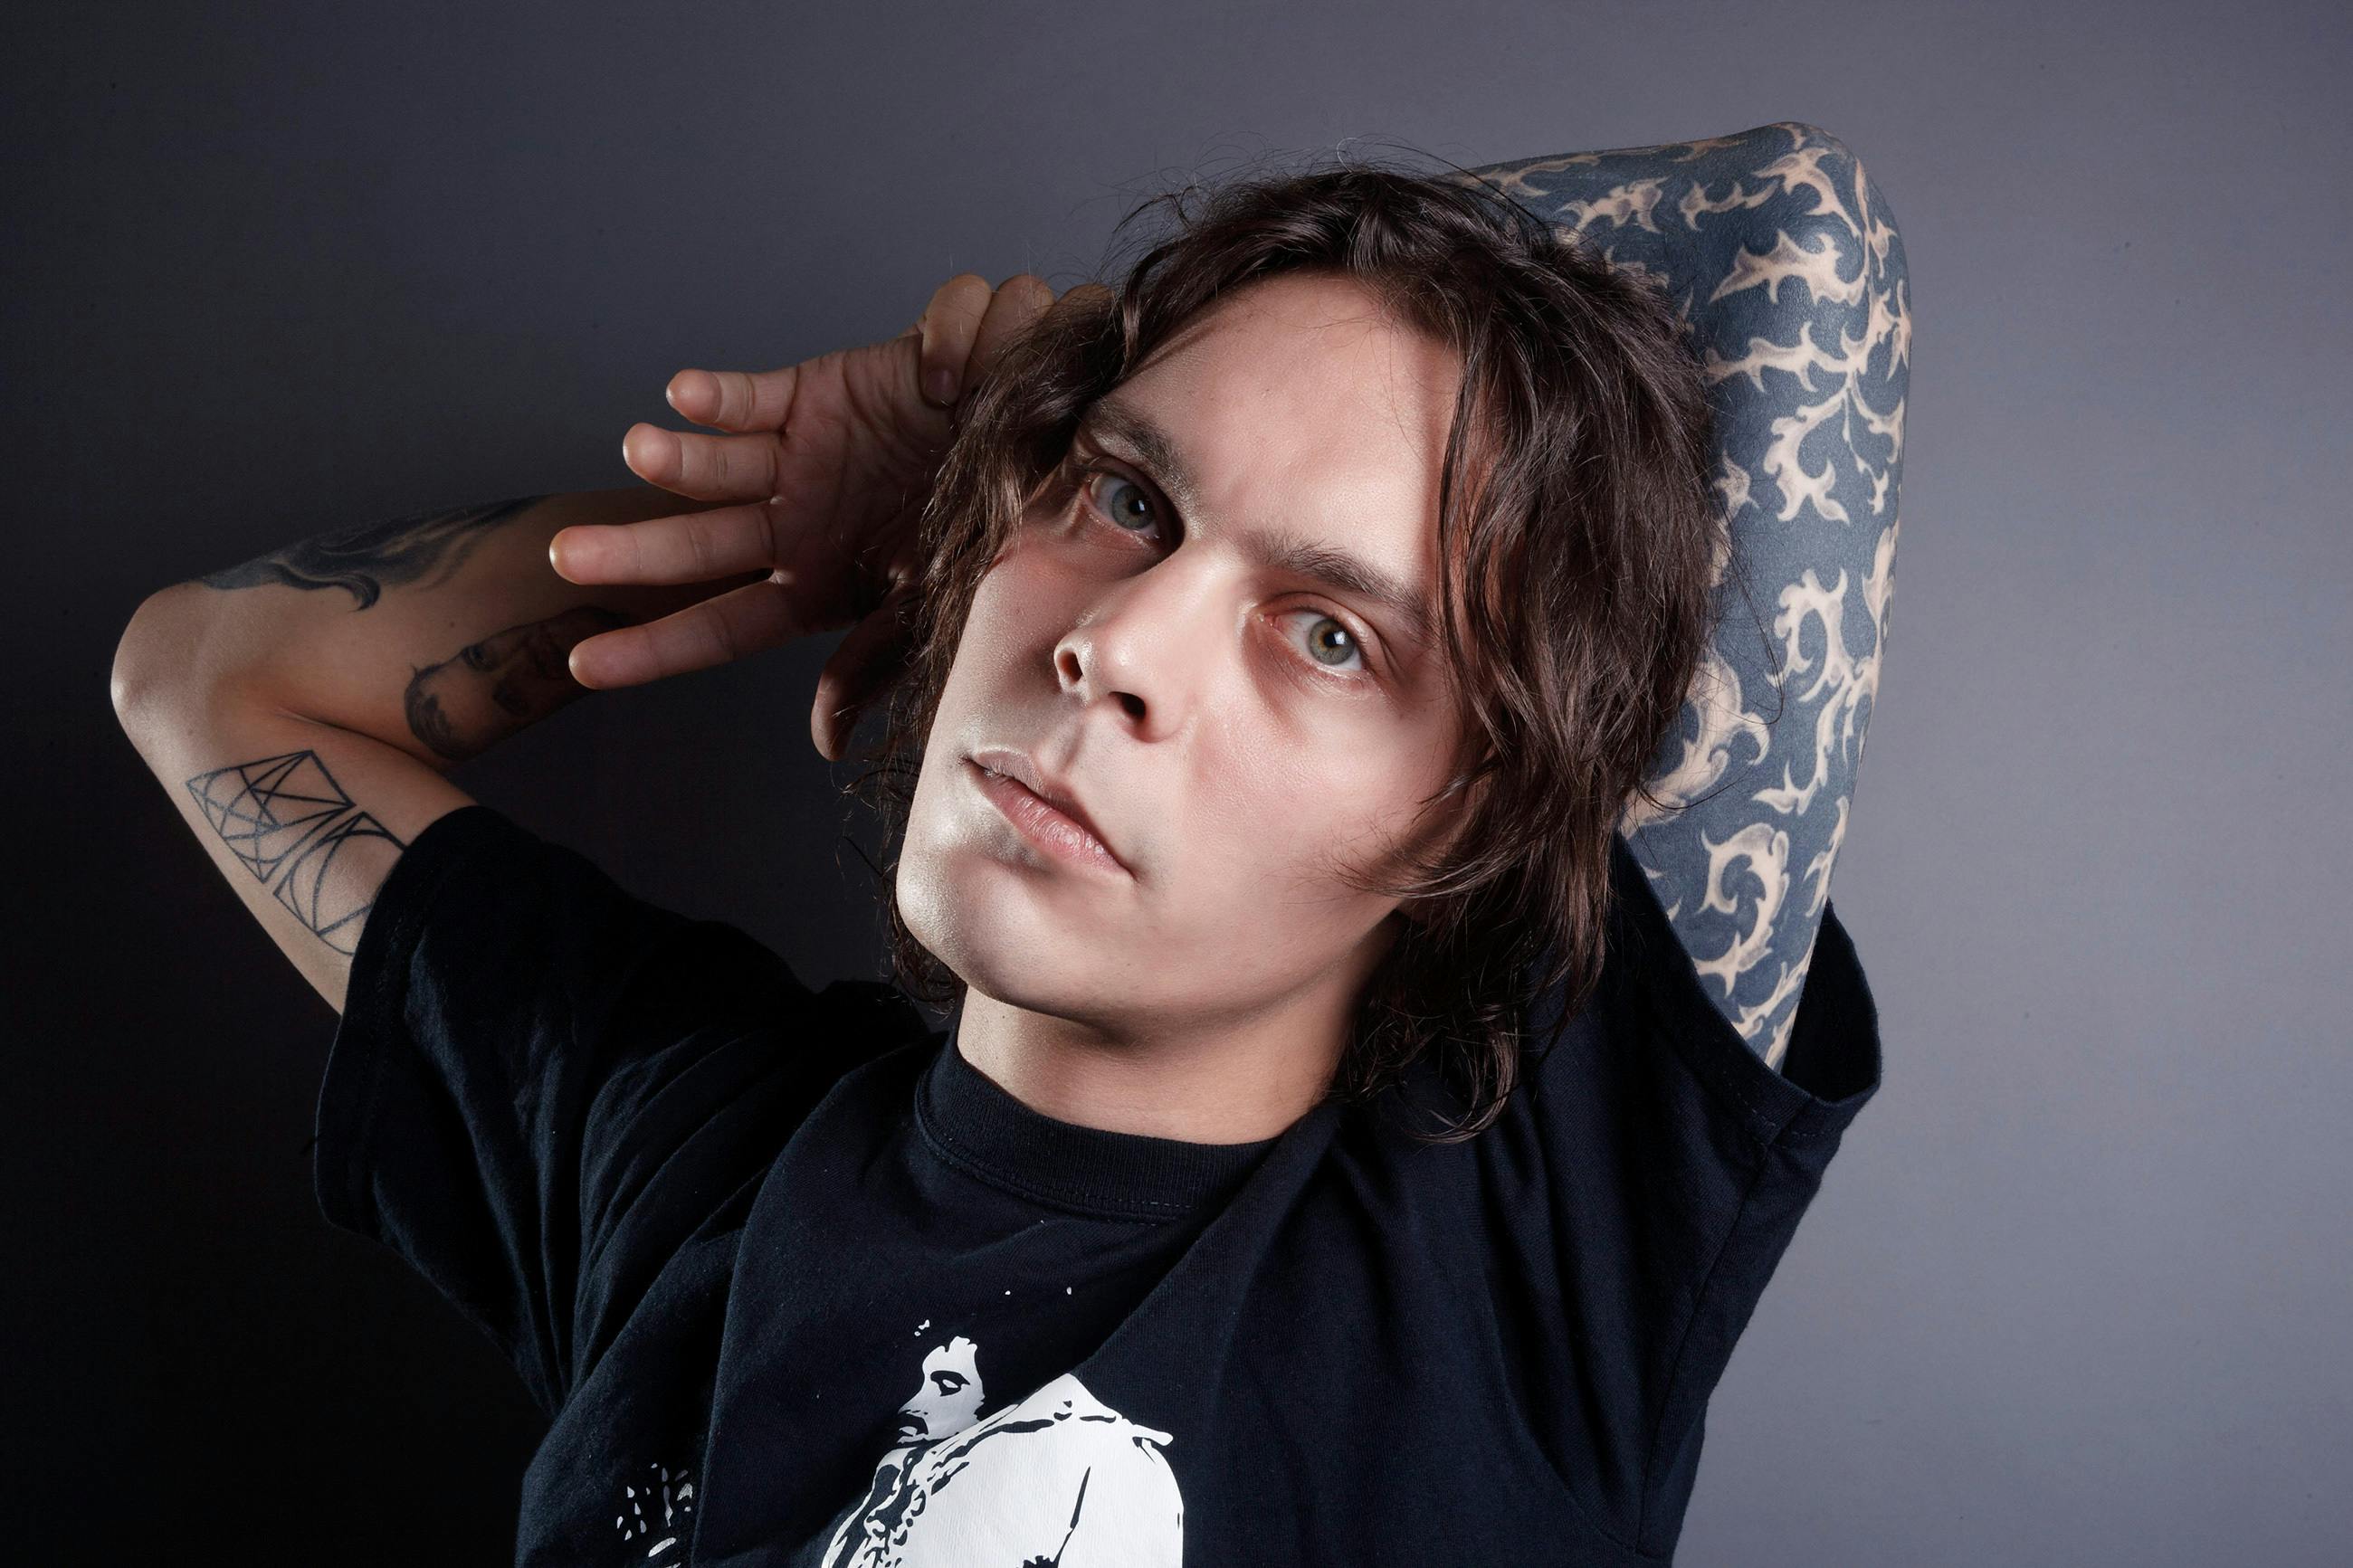 HIM’s Ville Valo releases new EP, Gothica Fennica Vol. 1